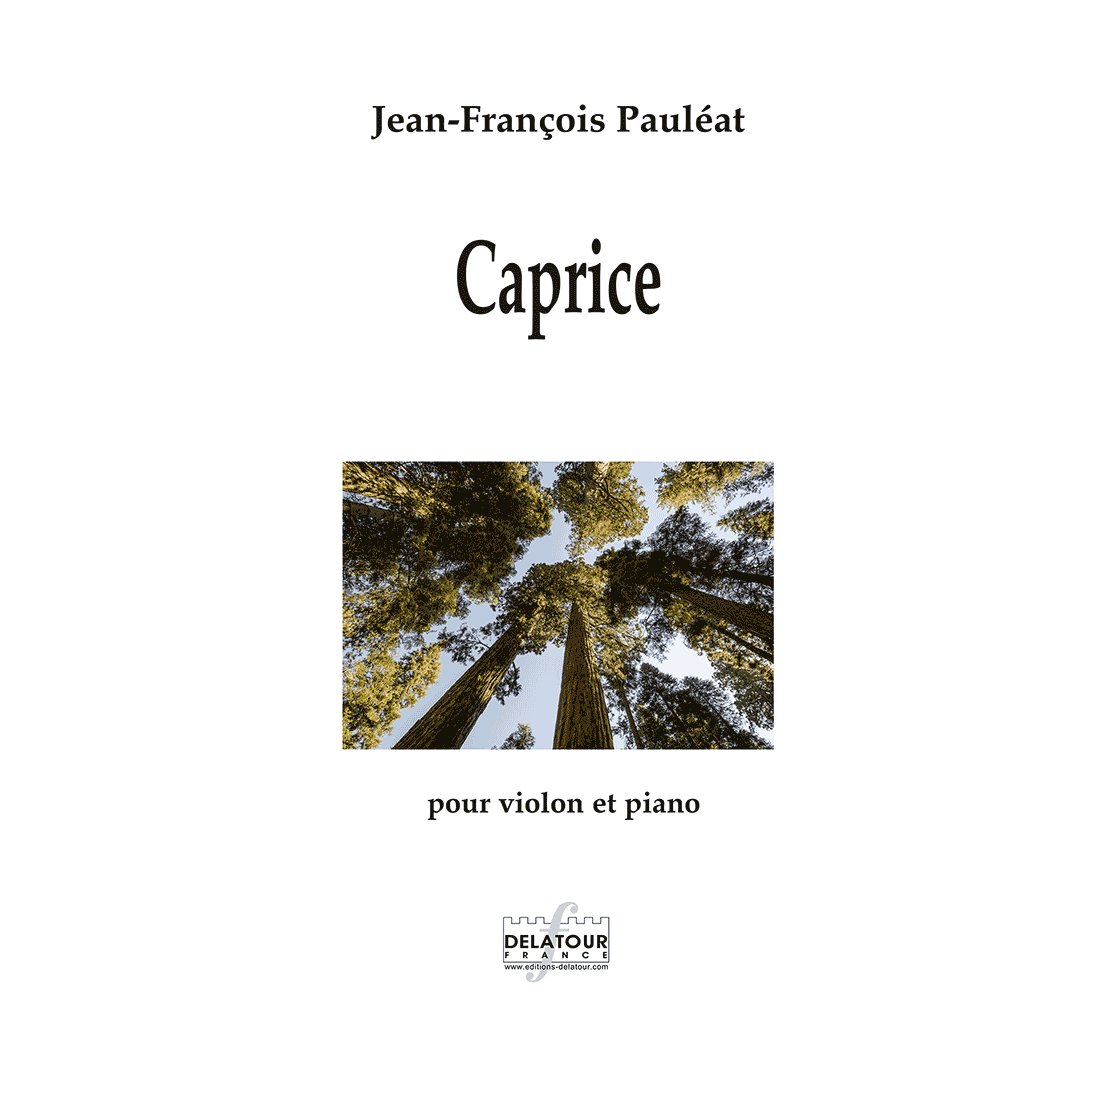 Caprice for violin and piano